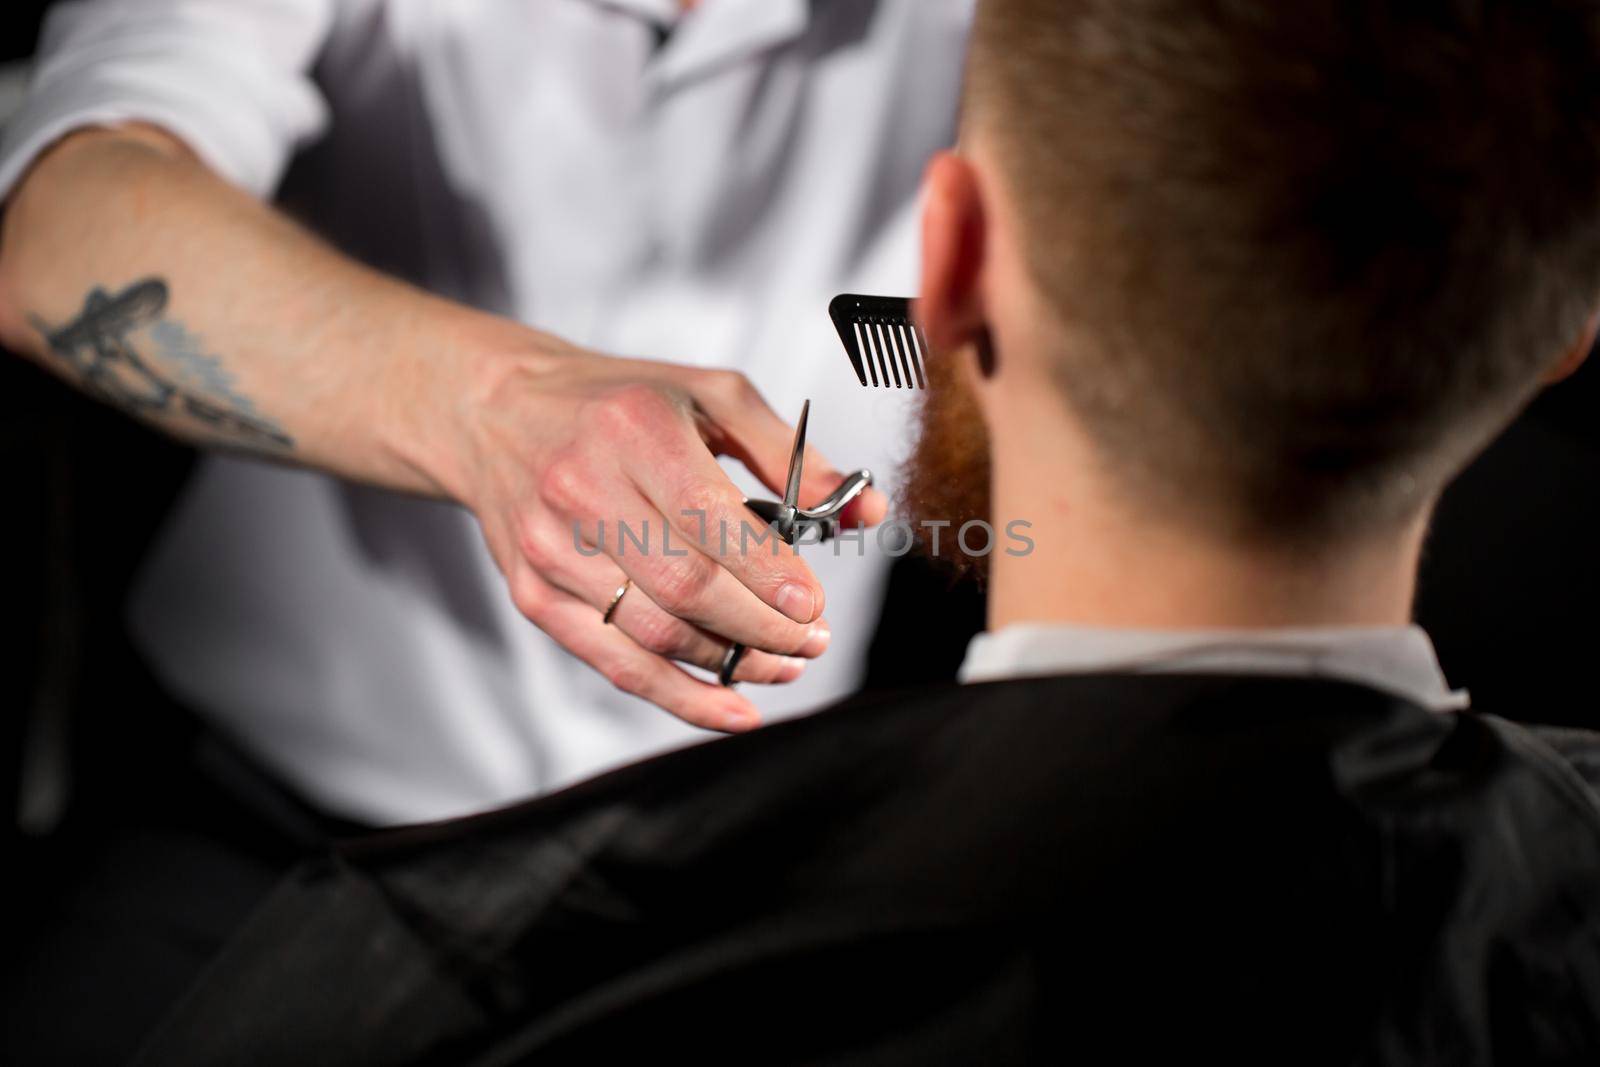 Master cuts hair and beard in the Barber shop. Hairdresser makes hairstyle using scissors and a metal comb.